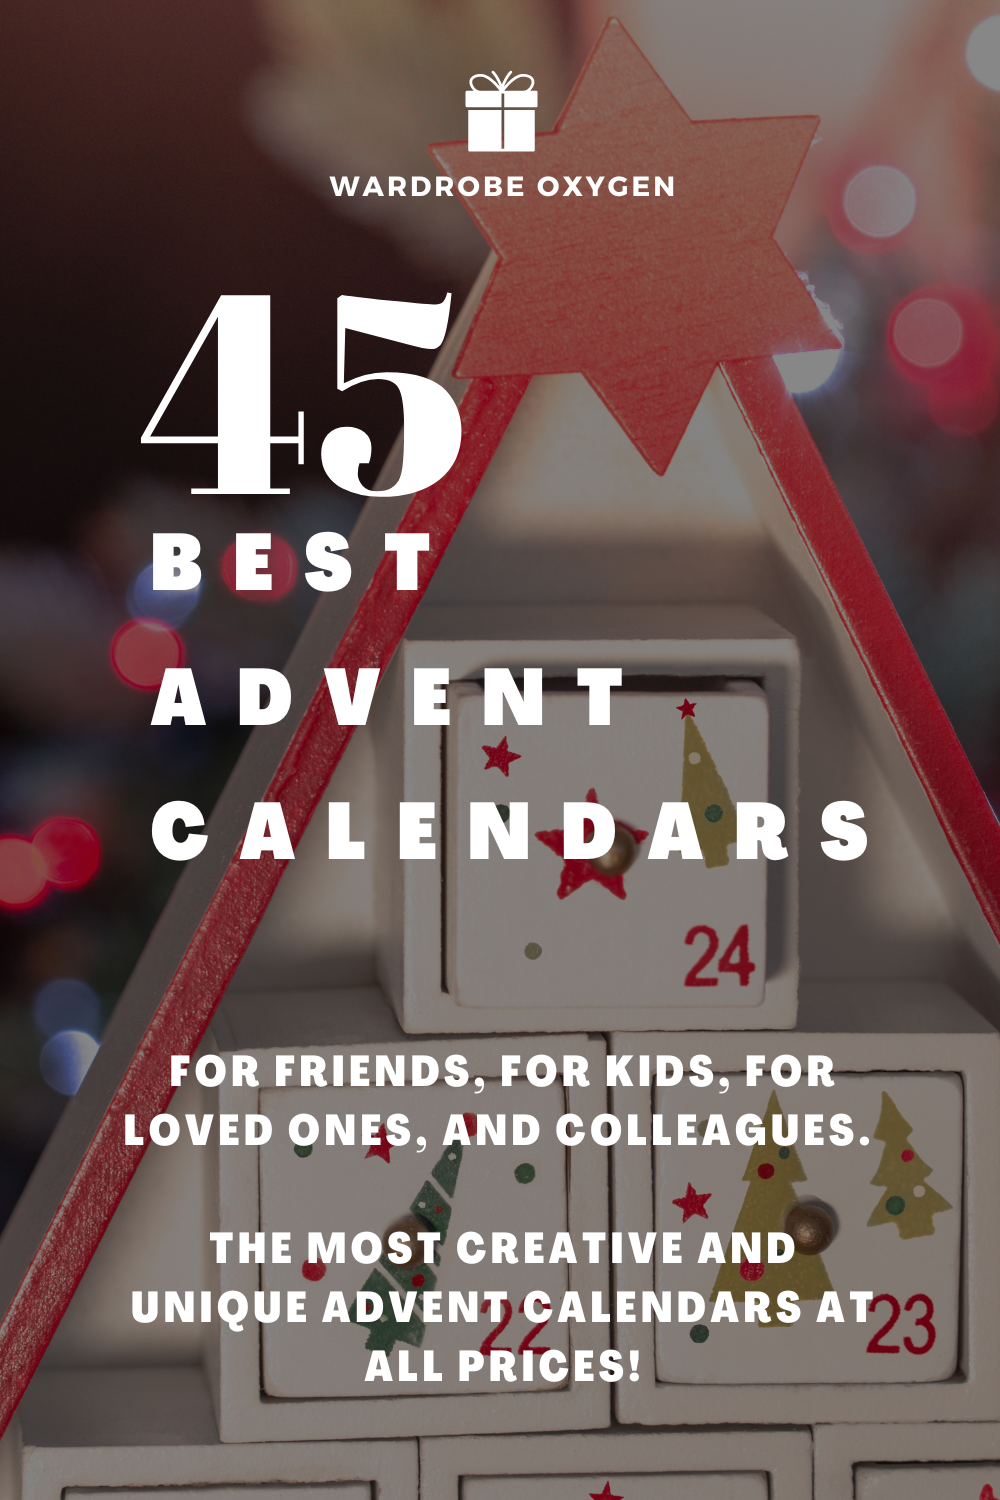 The 45 Best Advent Calendars for 2022 - Wardrobe Oxygen